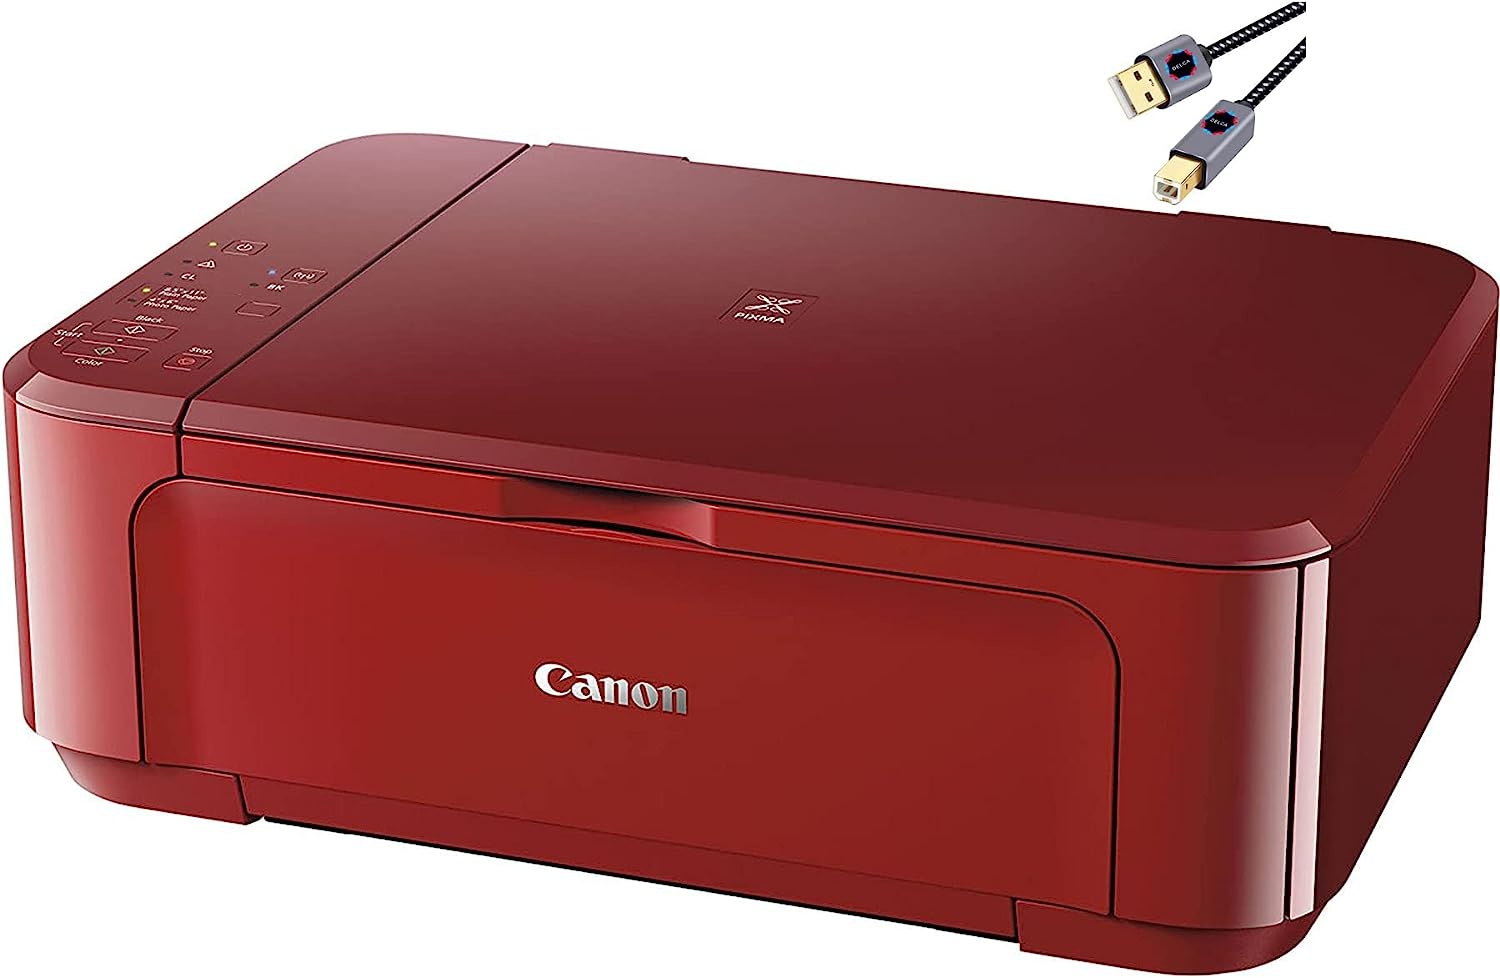 Canon Pixma 3620 Series All-in-One Color Inkjet [...]